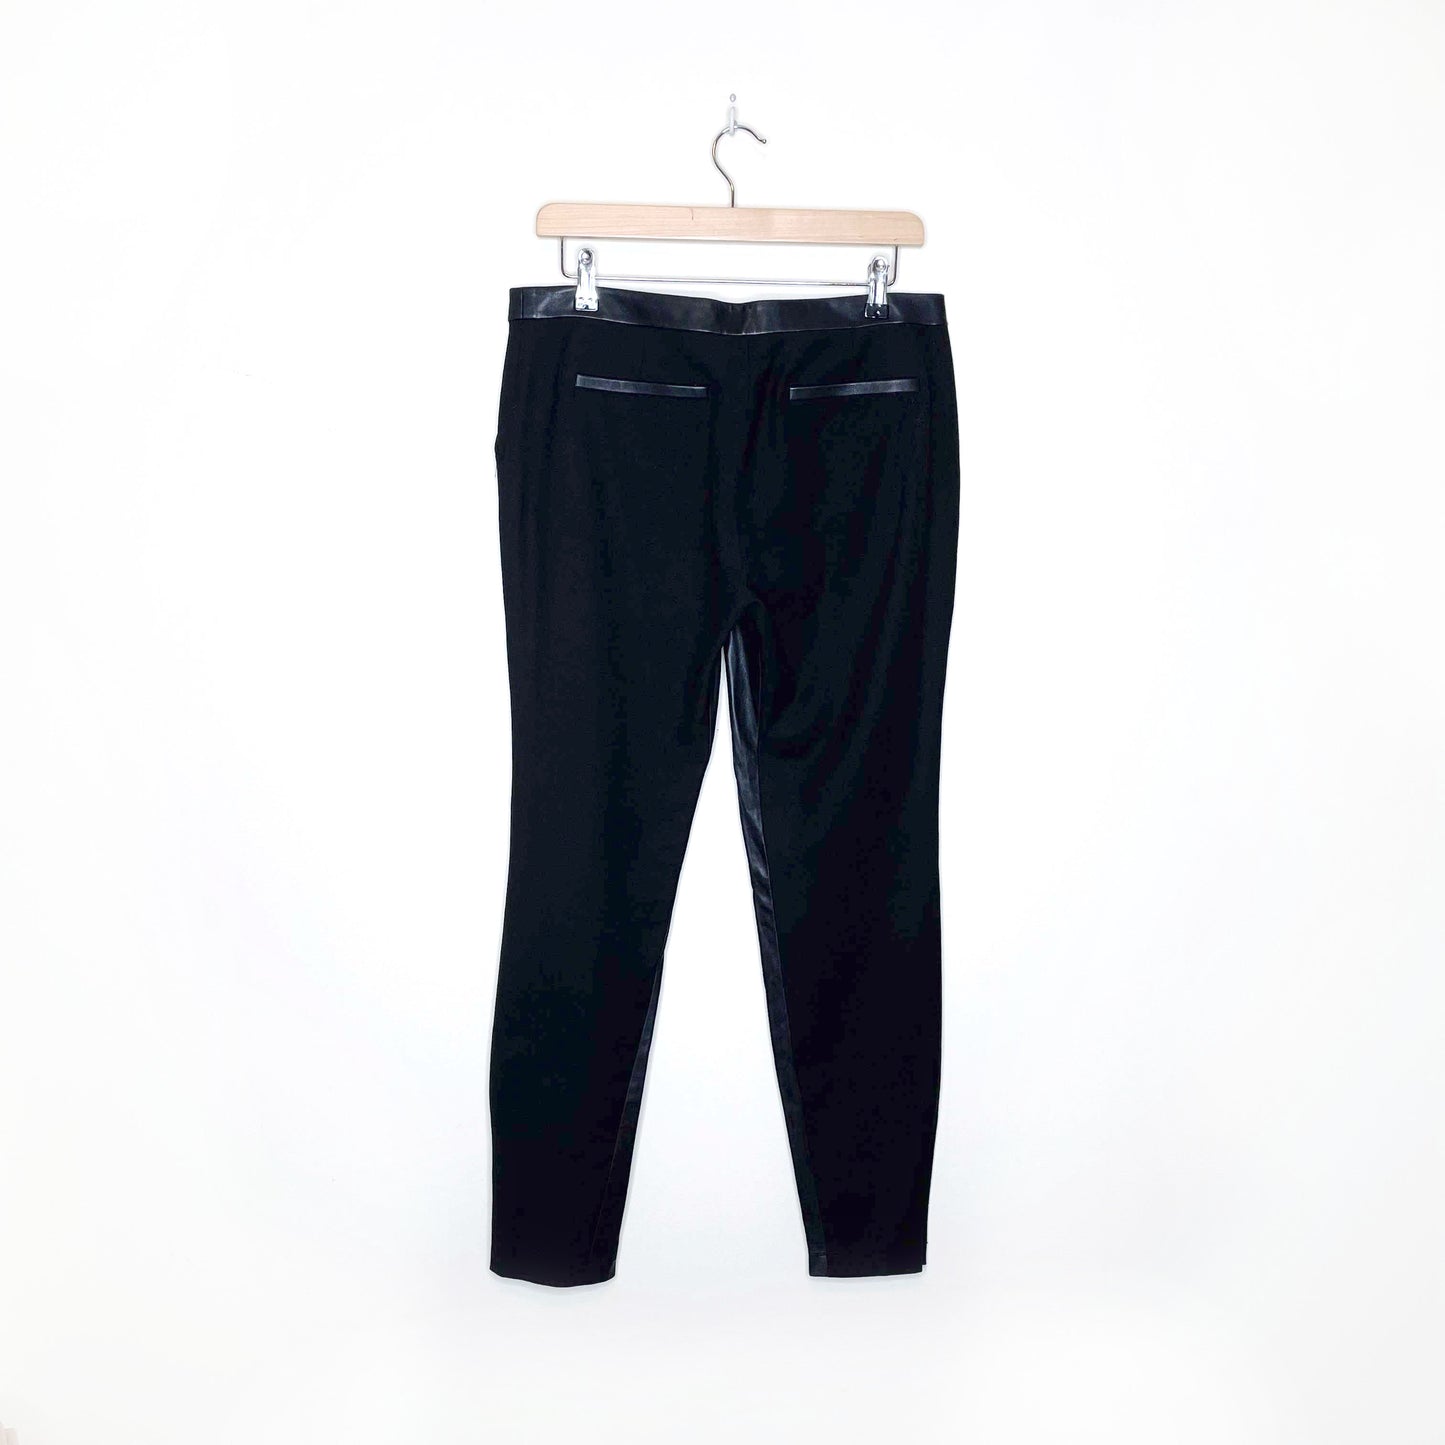 elizabeth and james butter leather trim trouser - size 6